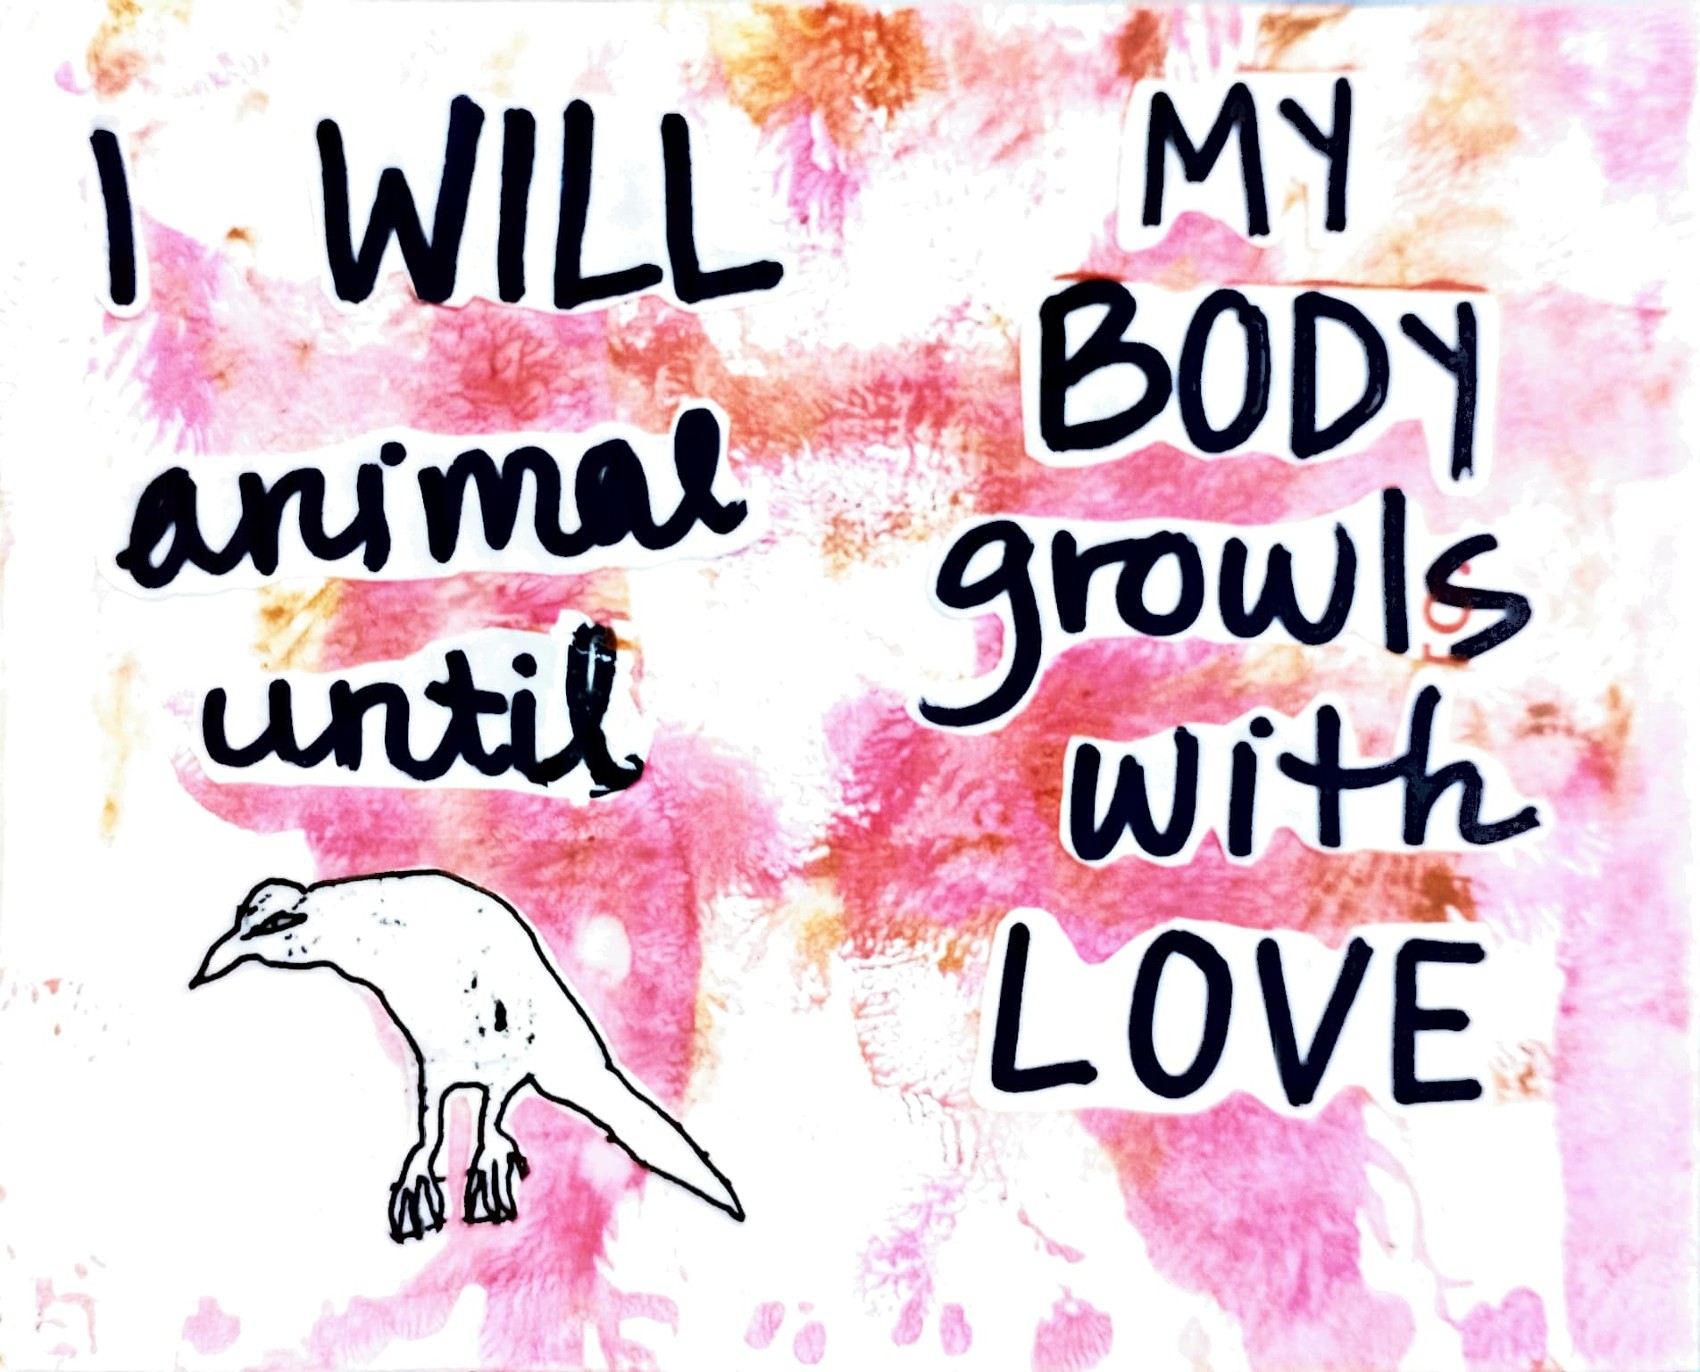 i will animal until my body growls with love